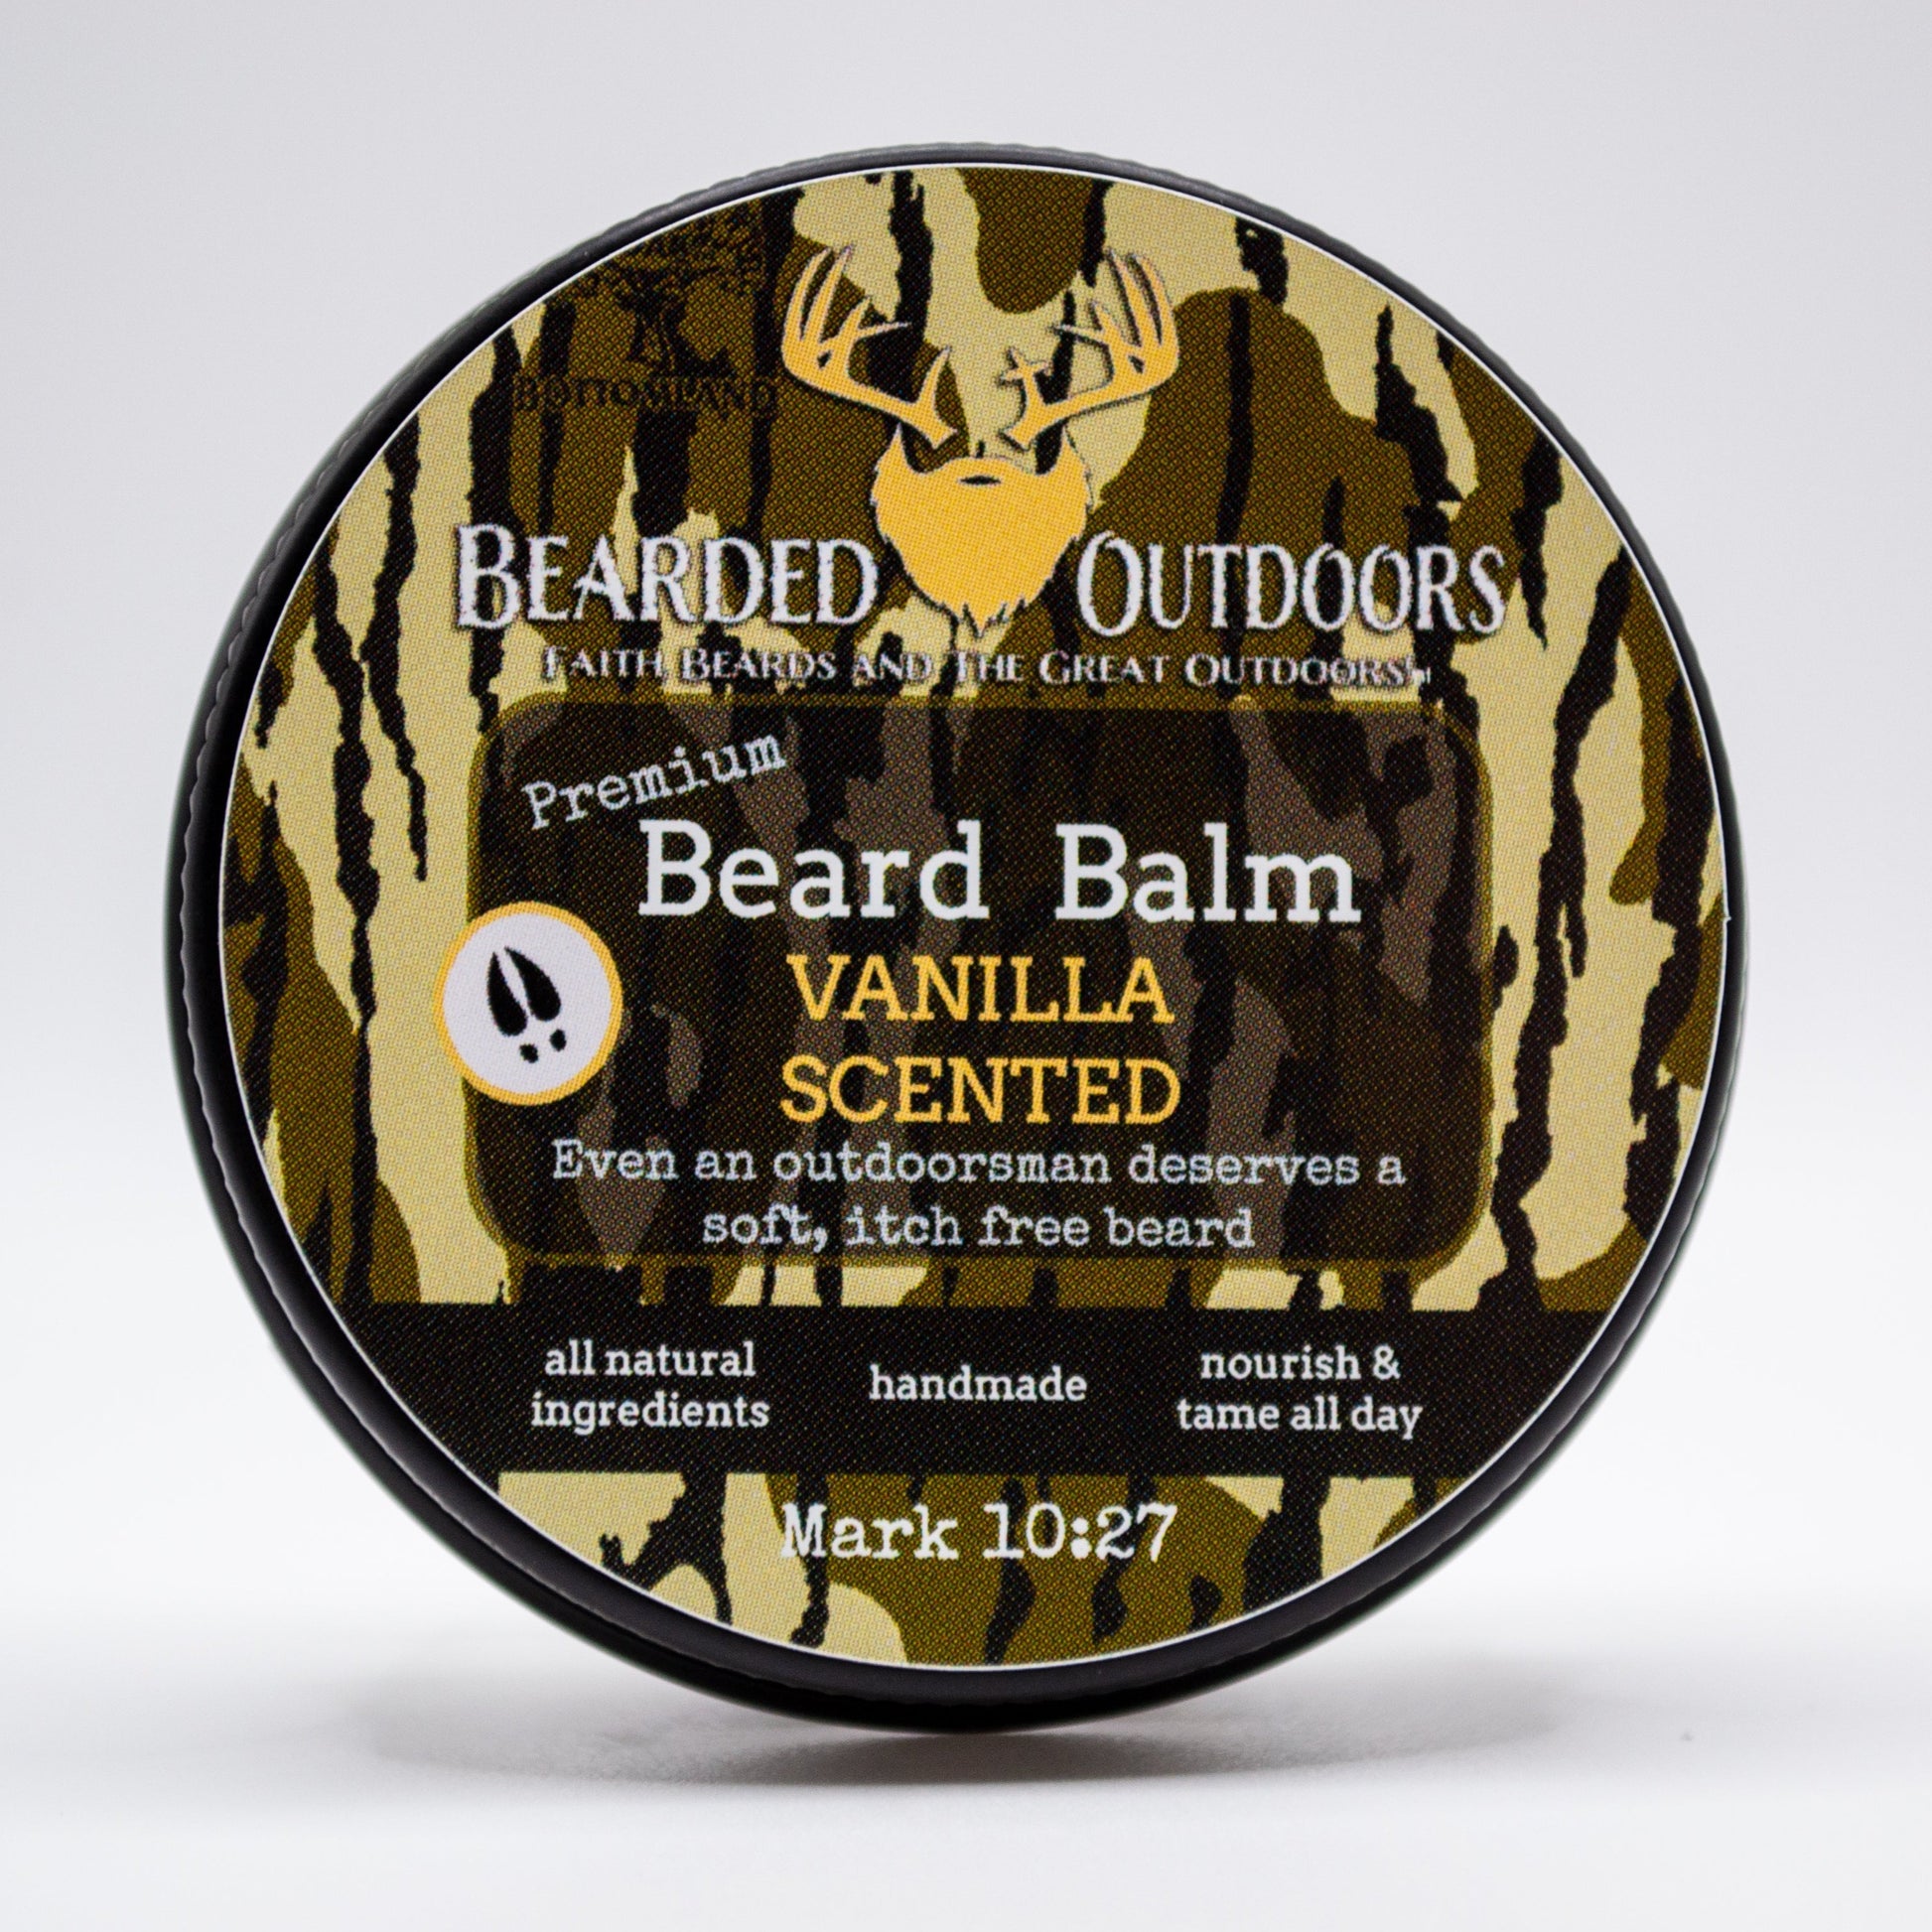 Mossy Oak Vanilla Scented Premium Beard Balm wrapped in Bottomland Camo by Bearded Outdoors